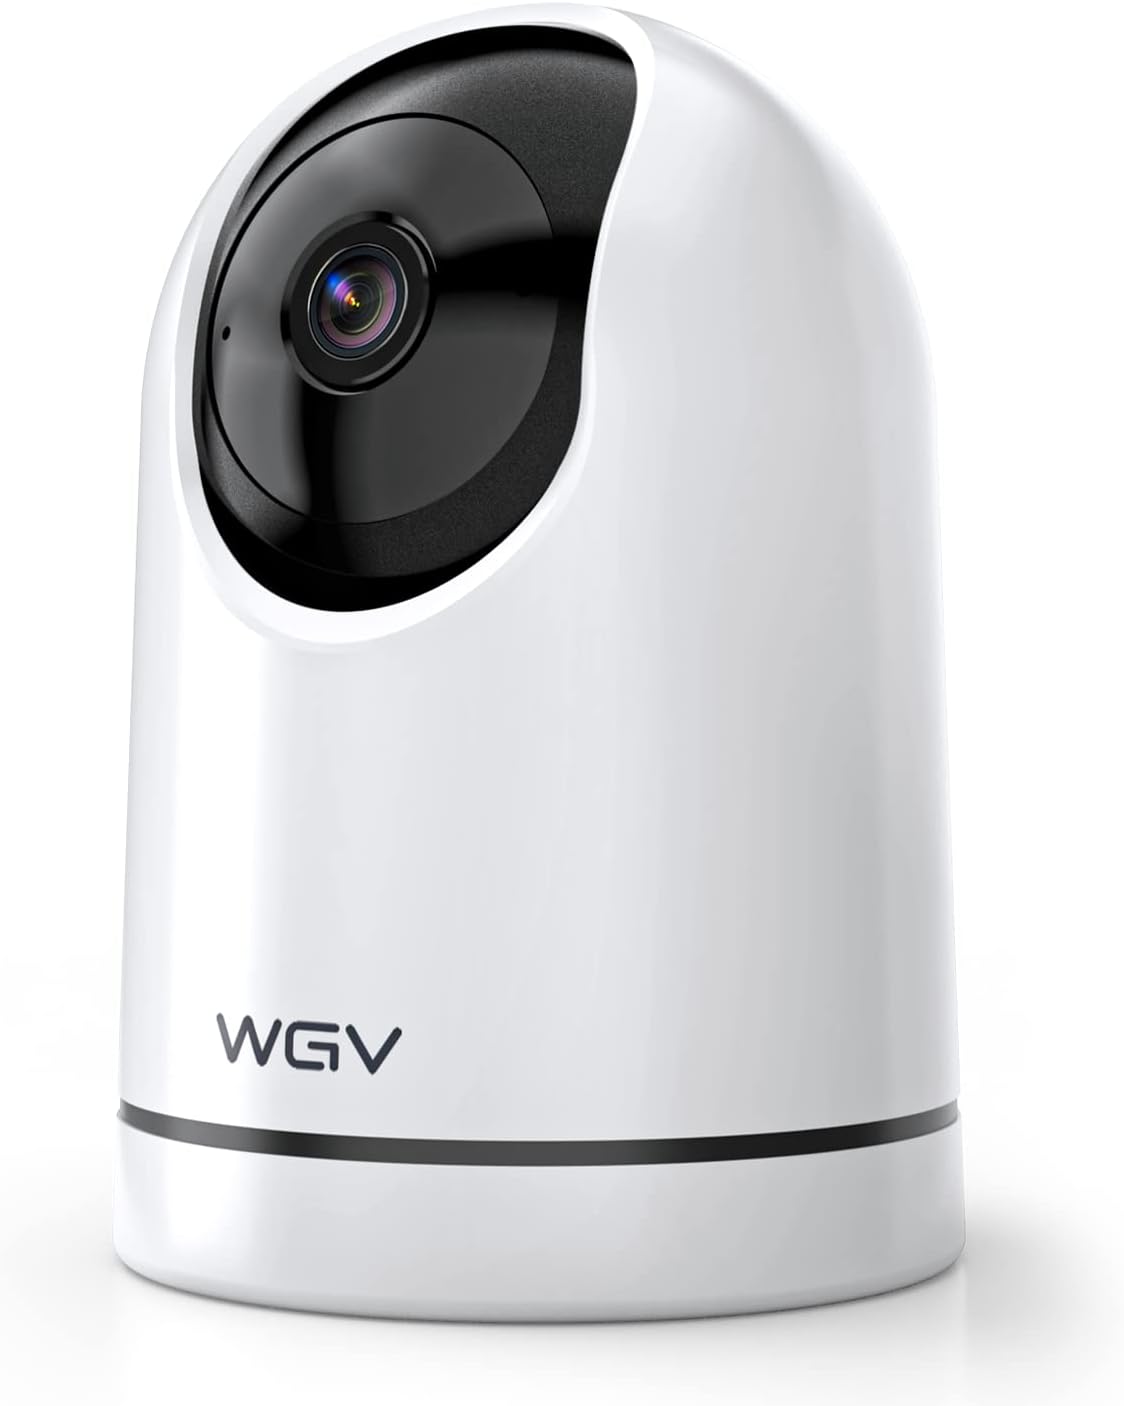 WGV Security Camera -2K Cameras for Home Security with Smart Motion Dection, Night Vision, Two-Way Audio,Cloud